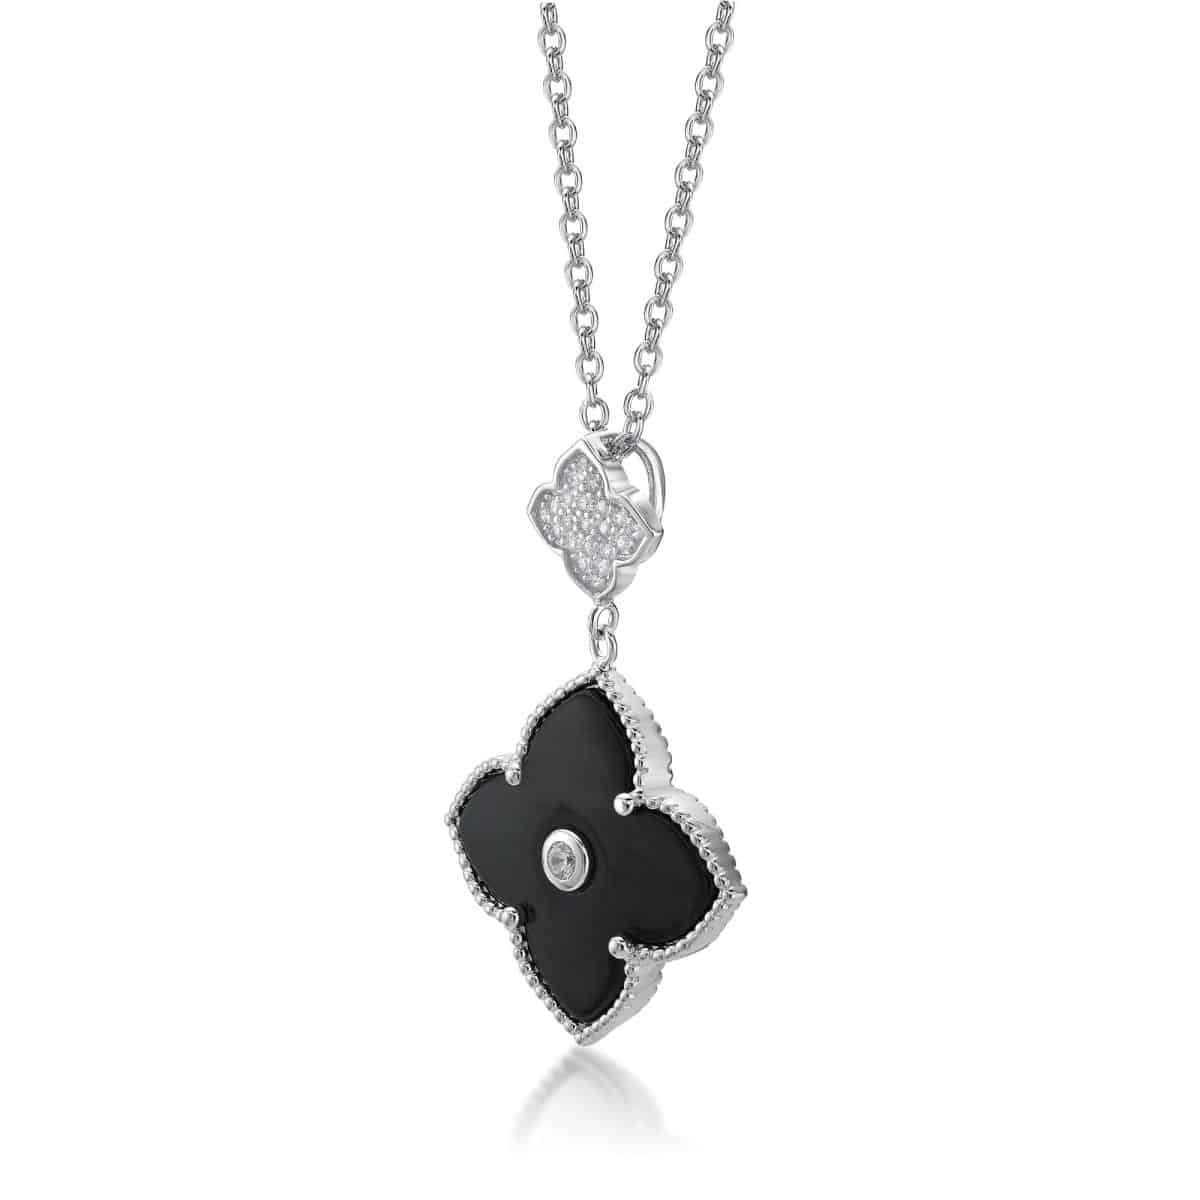 Women's Black Onyx Double Flower Pendant Necklace in Yellow Gold Plate Sterling Silver with Cubic Zirconia - 16-18 Inch Adjustable Cable Chain - Flora | Lavari Jewelers